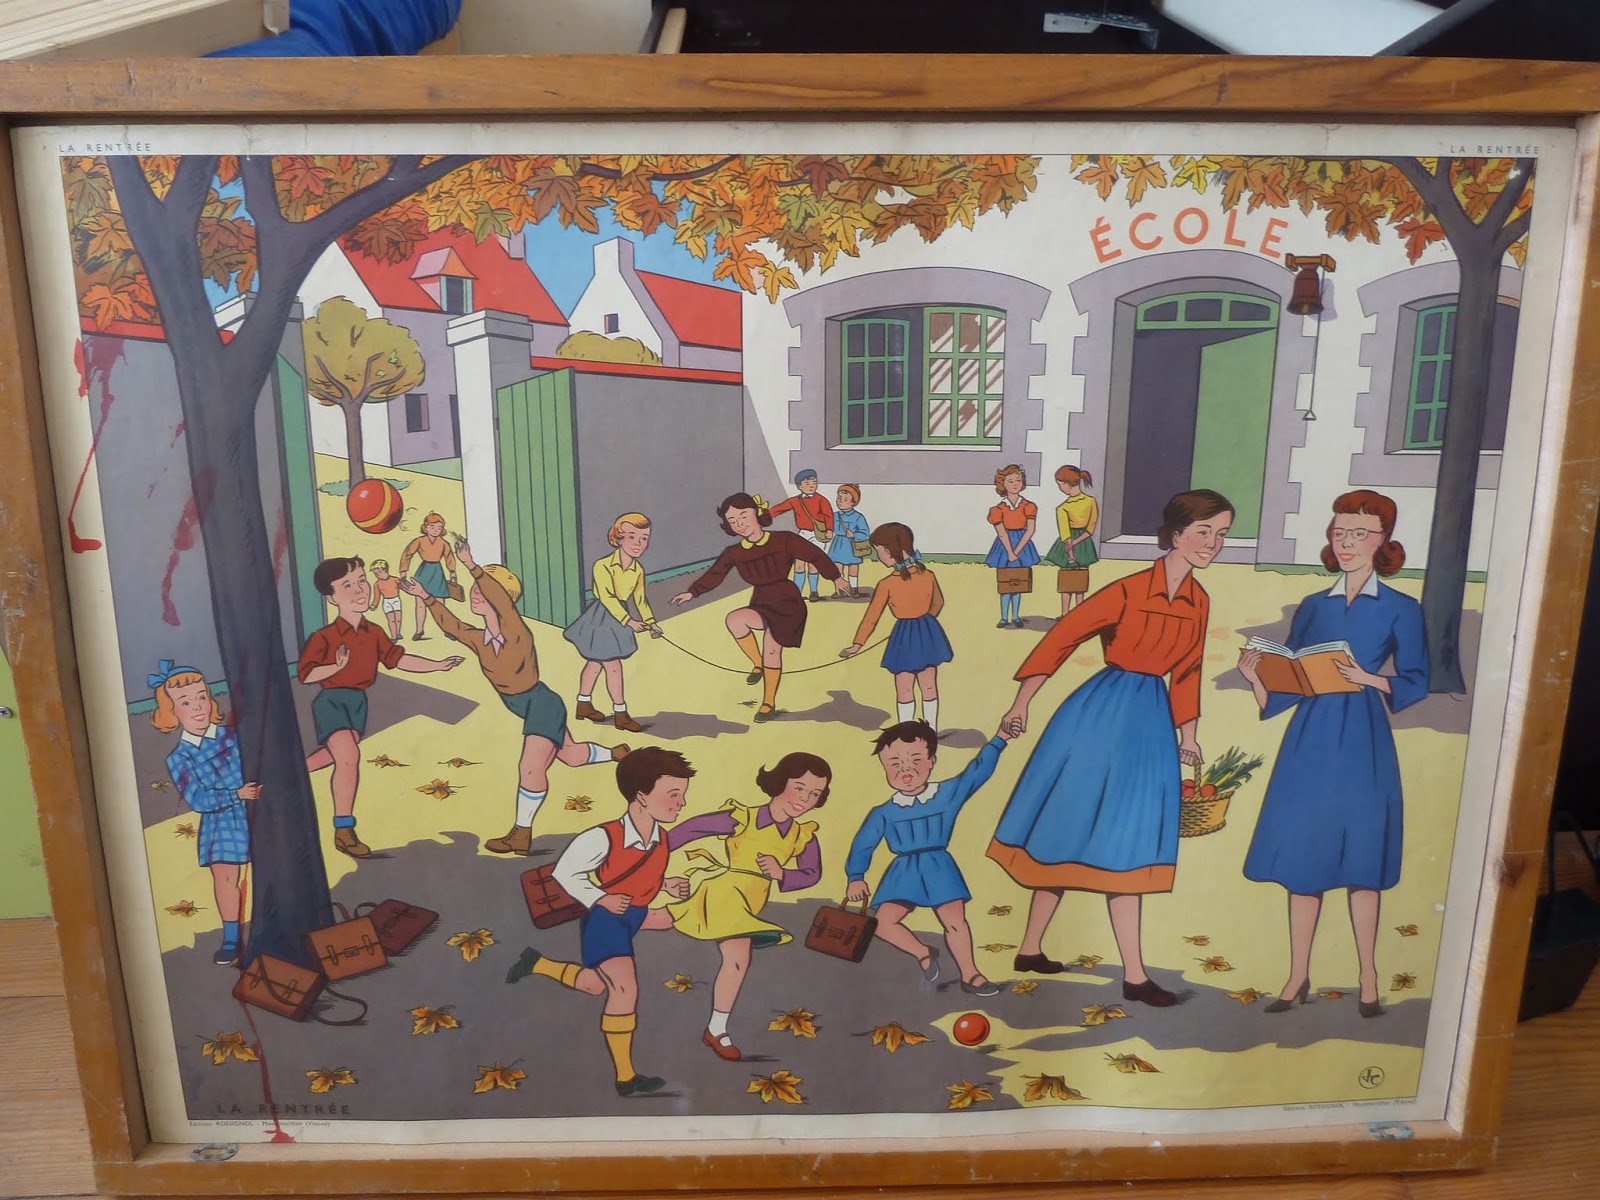 Ecole FMR 1000 Affiches Scolaires Affiche Scolaire Rossignol 1960